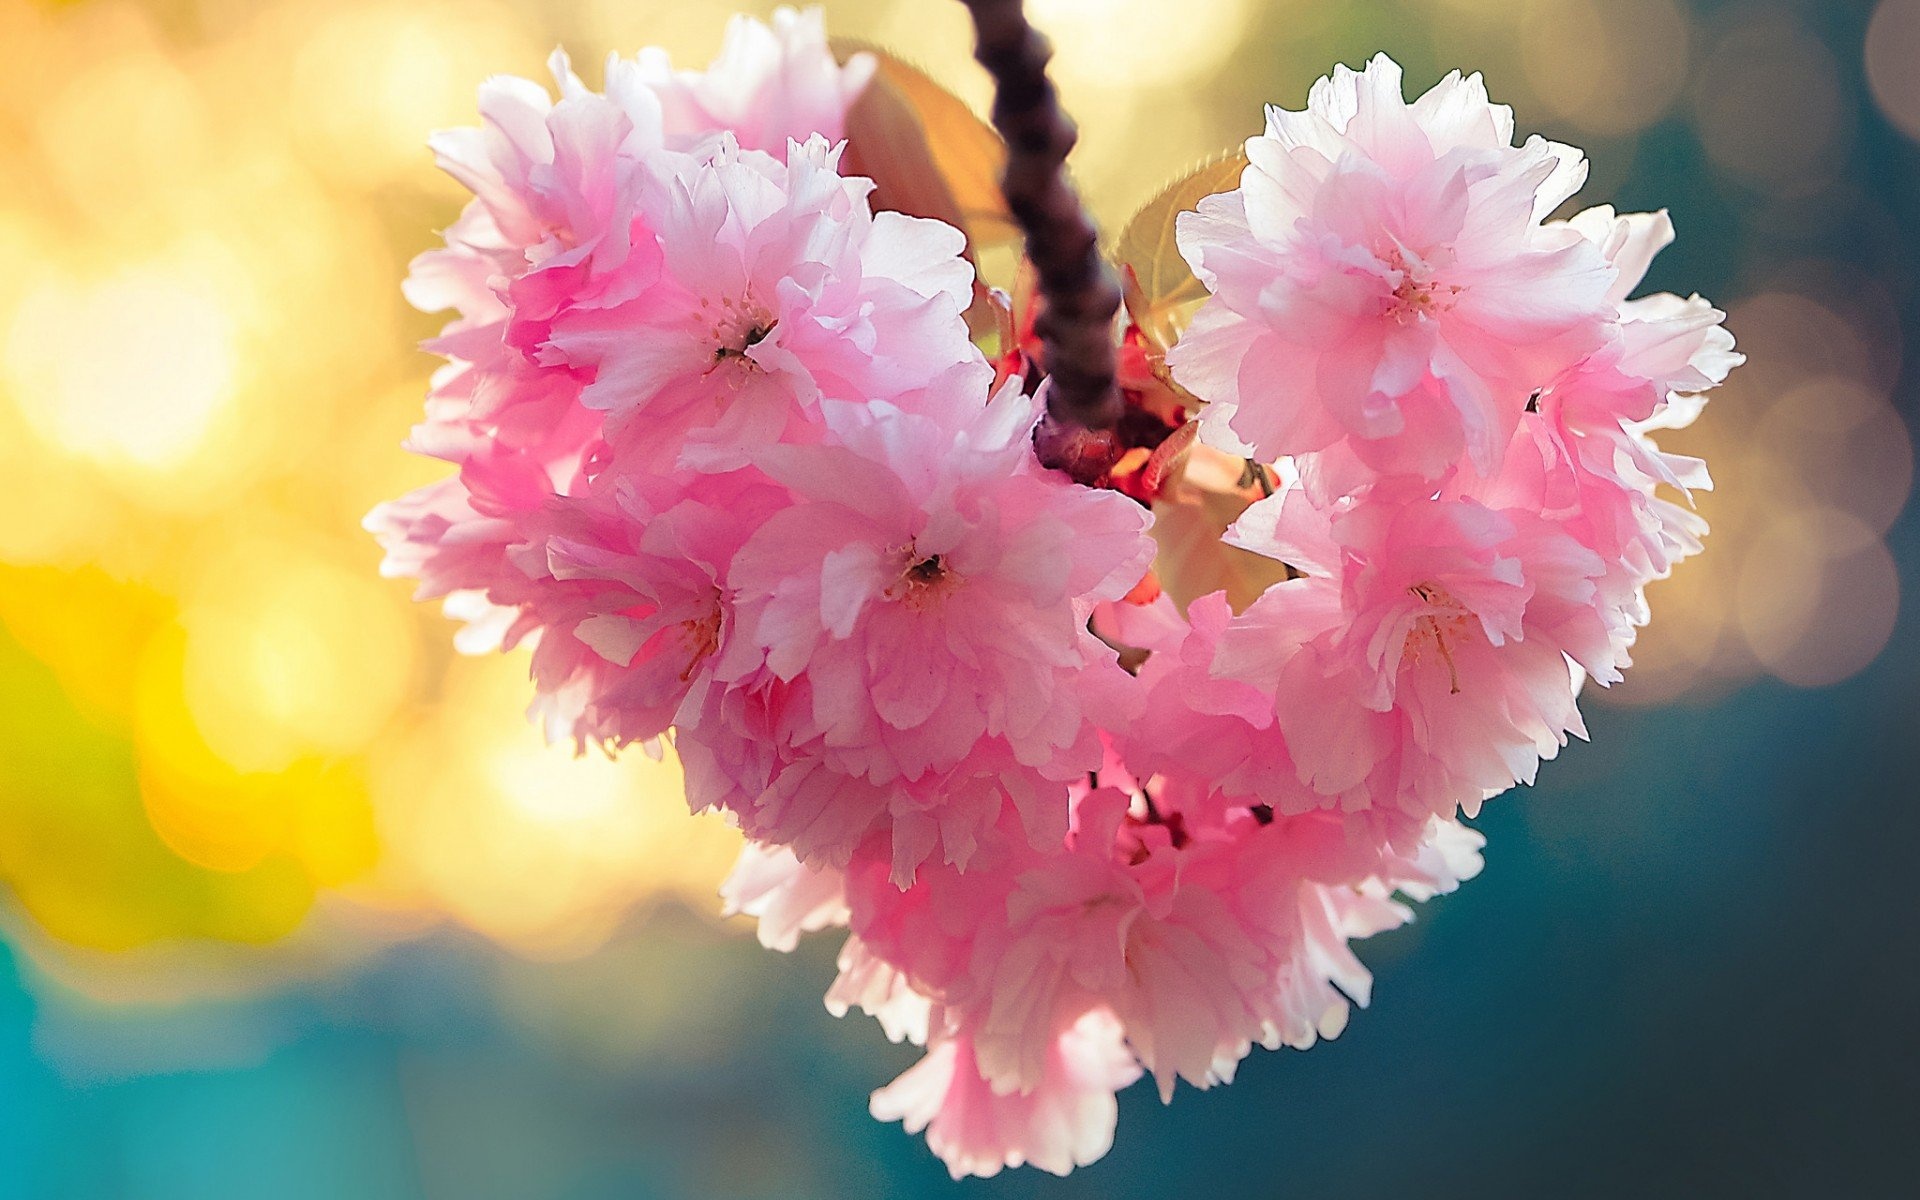 Hearts and Flowers, Love and nature, Blossoming beauty, Vibrant wallpaper, 1920x1200 HD Desktop